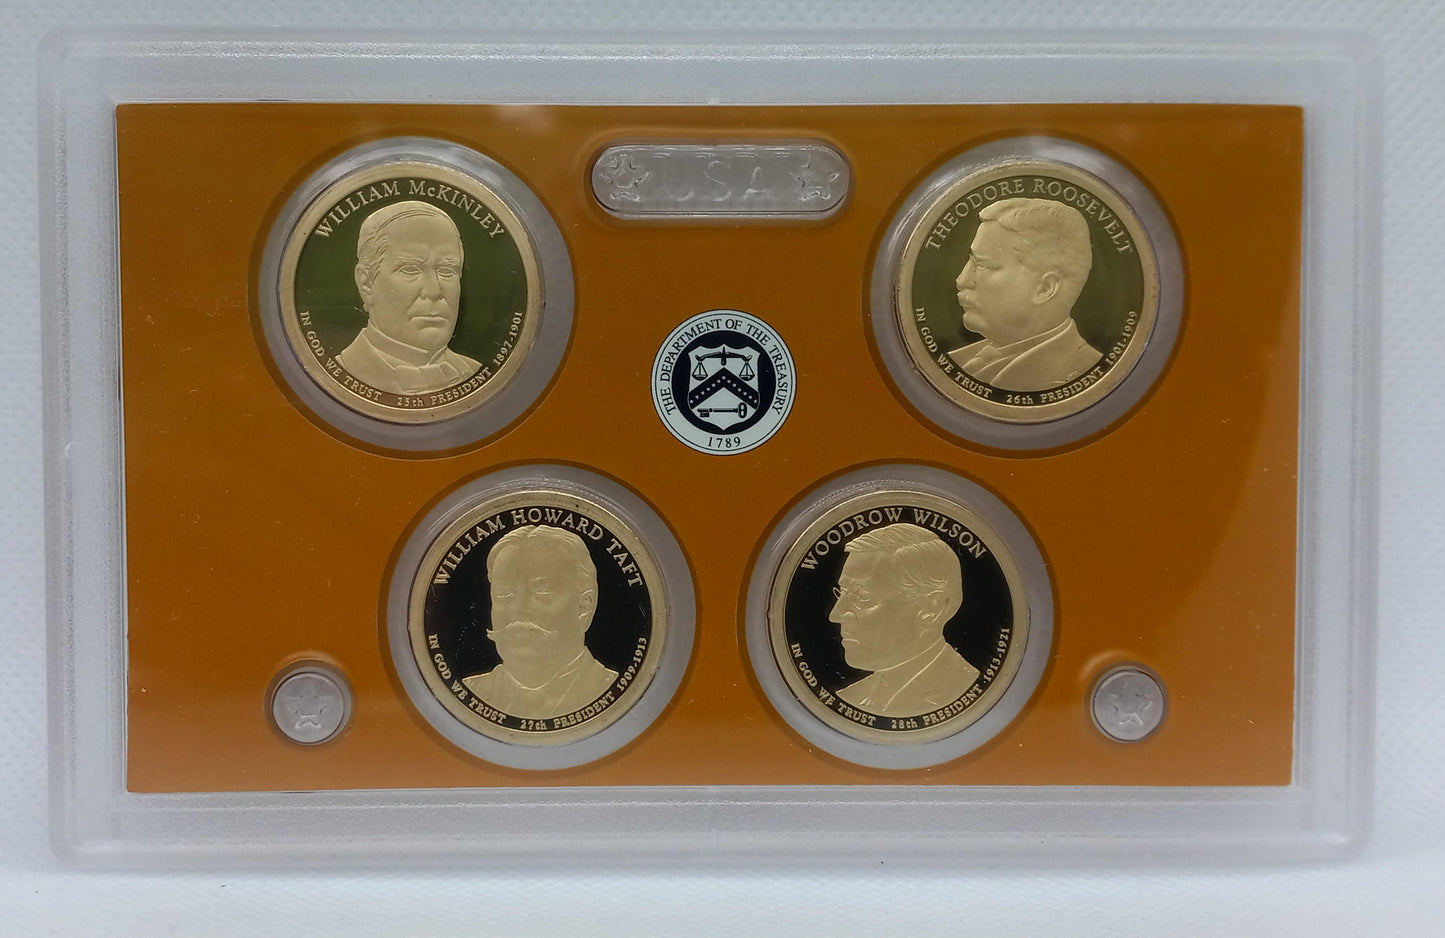 2013 United States Mint PRESIDENTIAL DOLLAR COIN PROOF SET With OGP & COA!